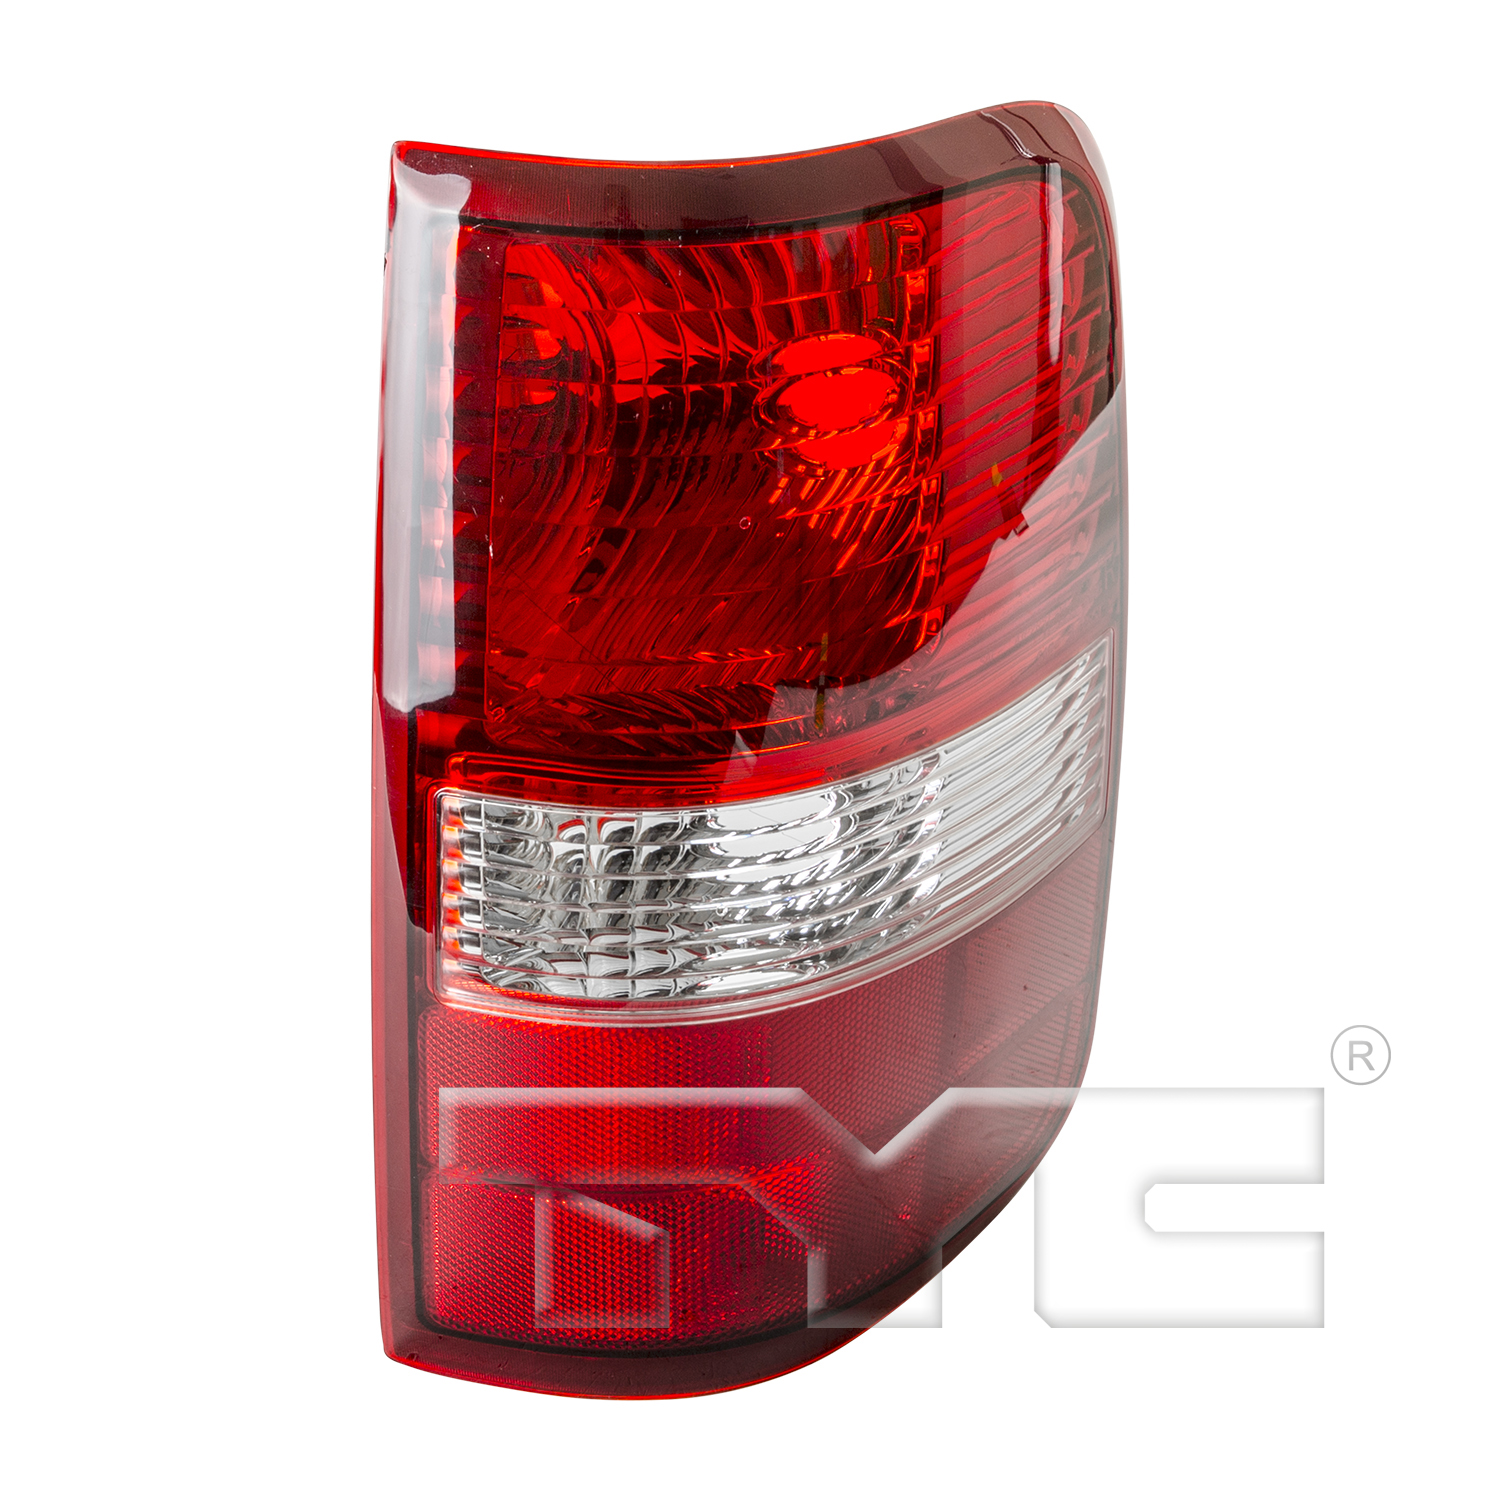 Aftermarket TAILLIGHTS for FORD - F-150, F-150,04-06,RT Taillamp assy